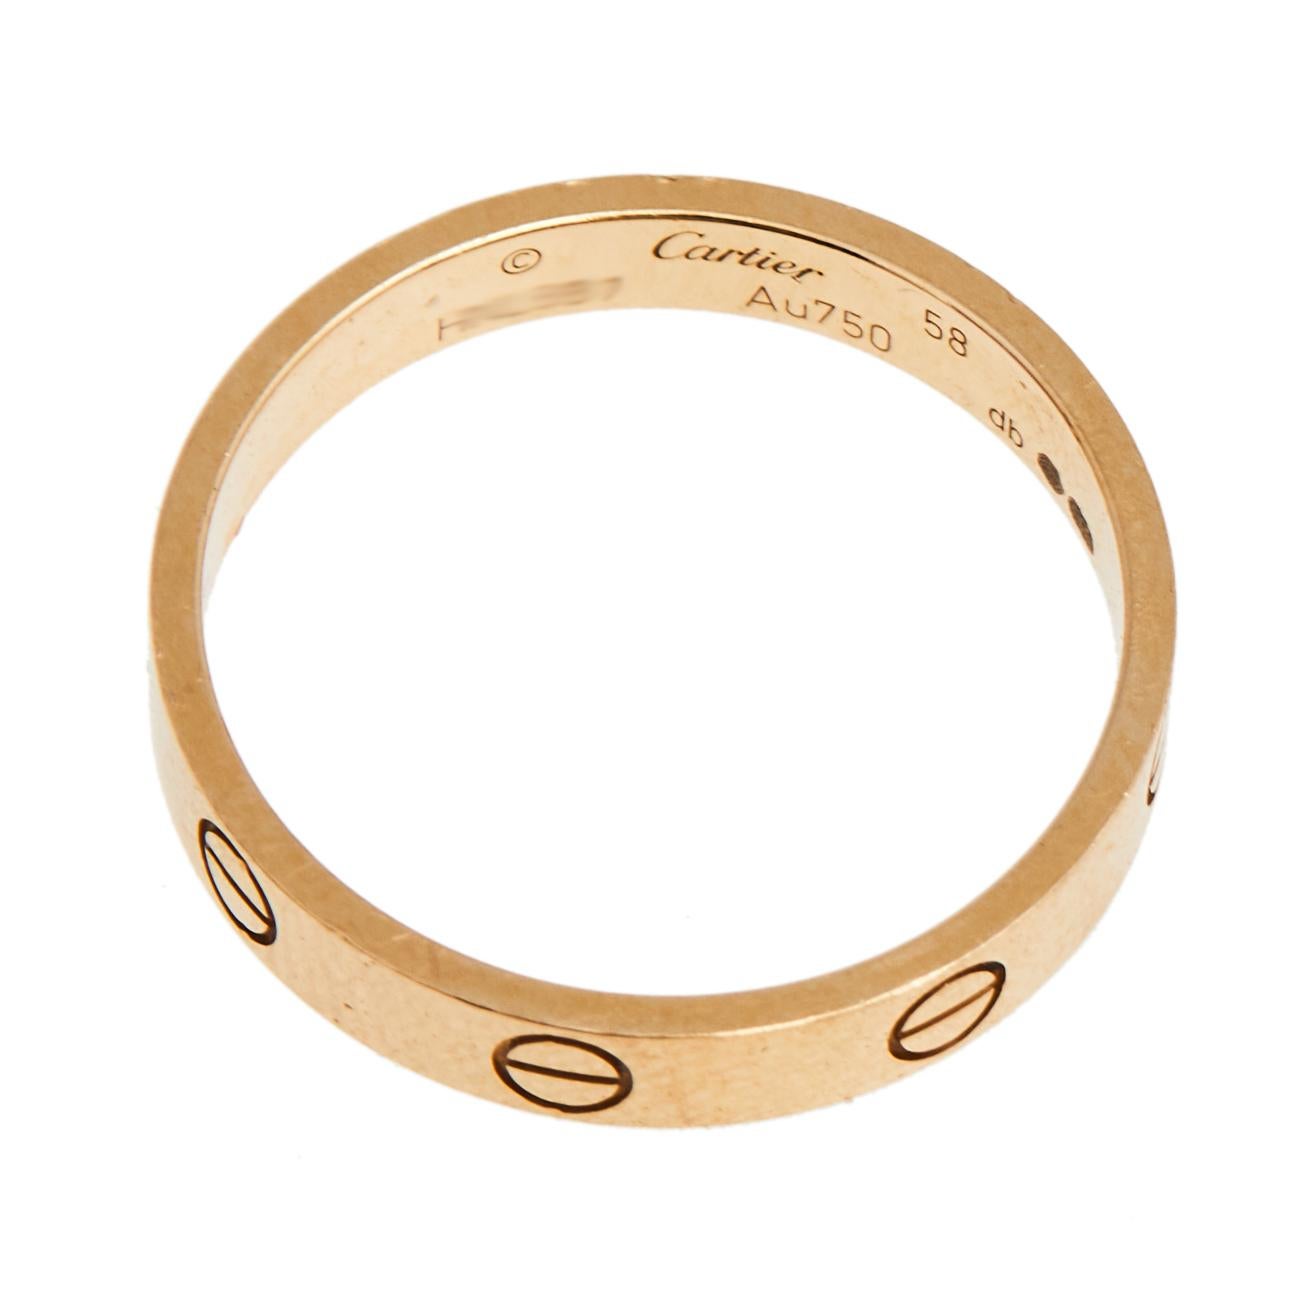 Cartier's Love band continues to be a favored choice when it comes to choosing a wedding or engagement ring and even as a special addition to one's collection. A ring version of the Love bracelet from the 1970s, this creation heralds the idea of